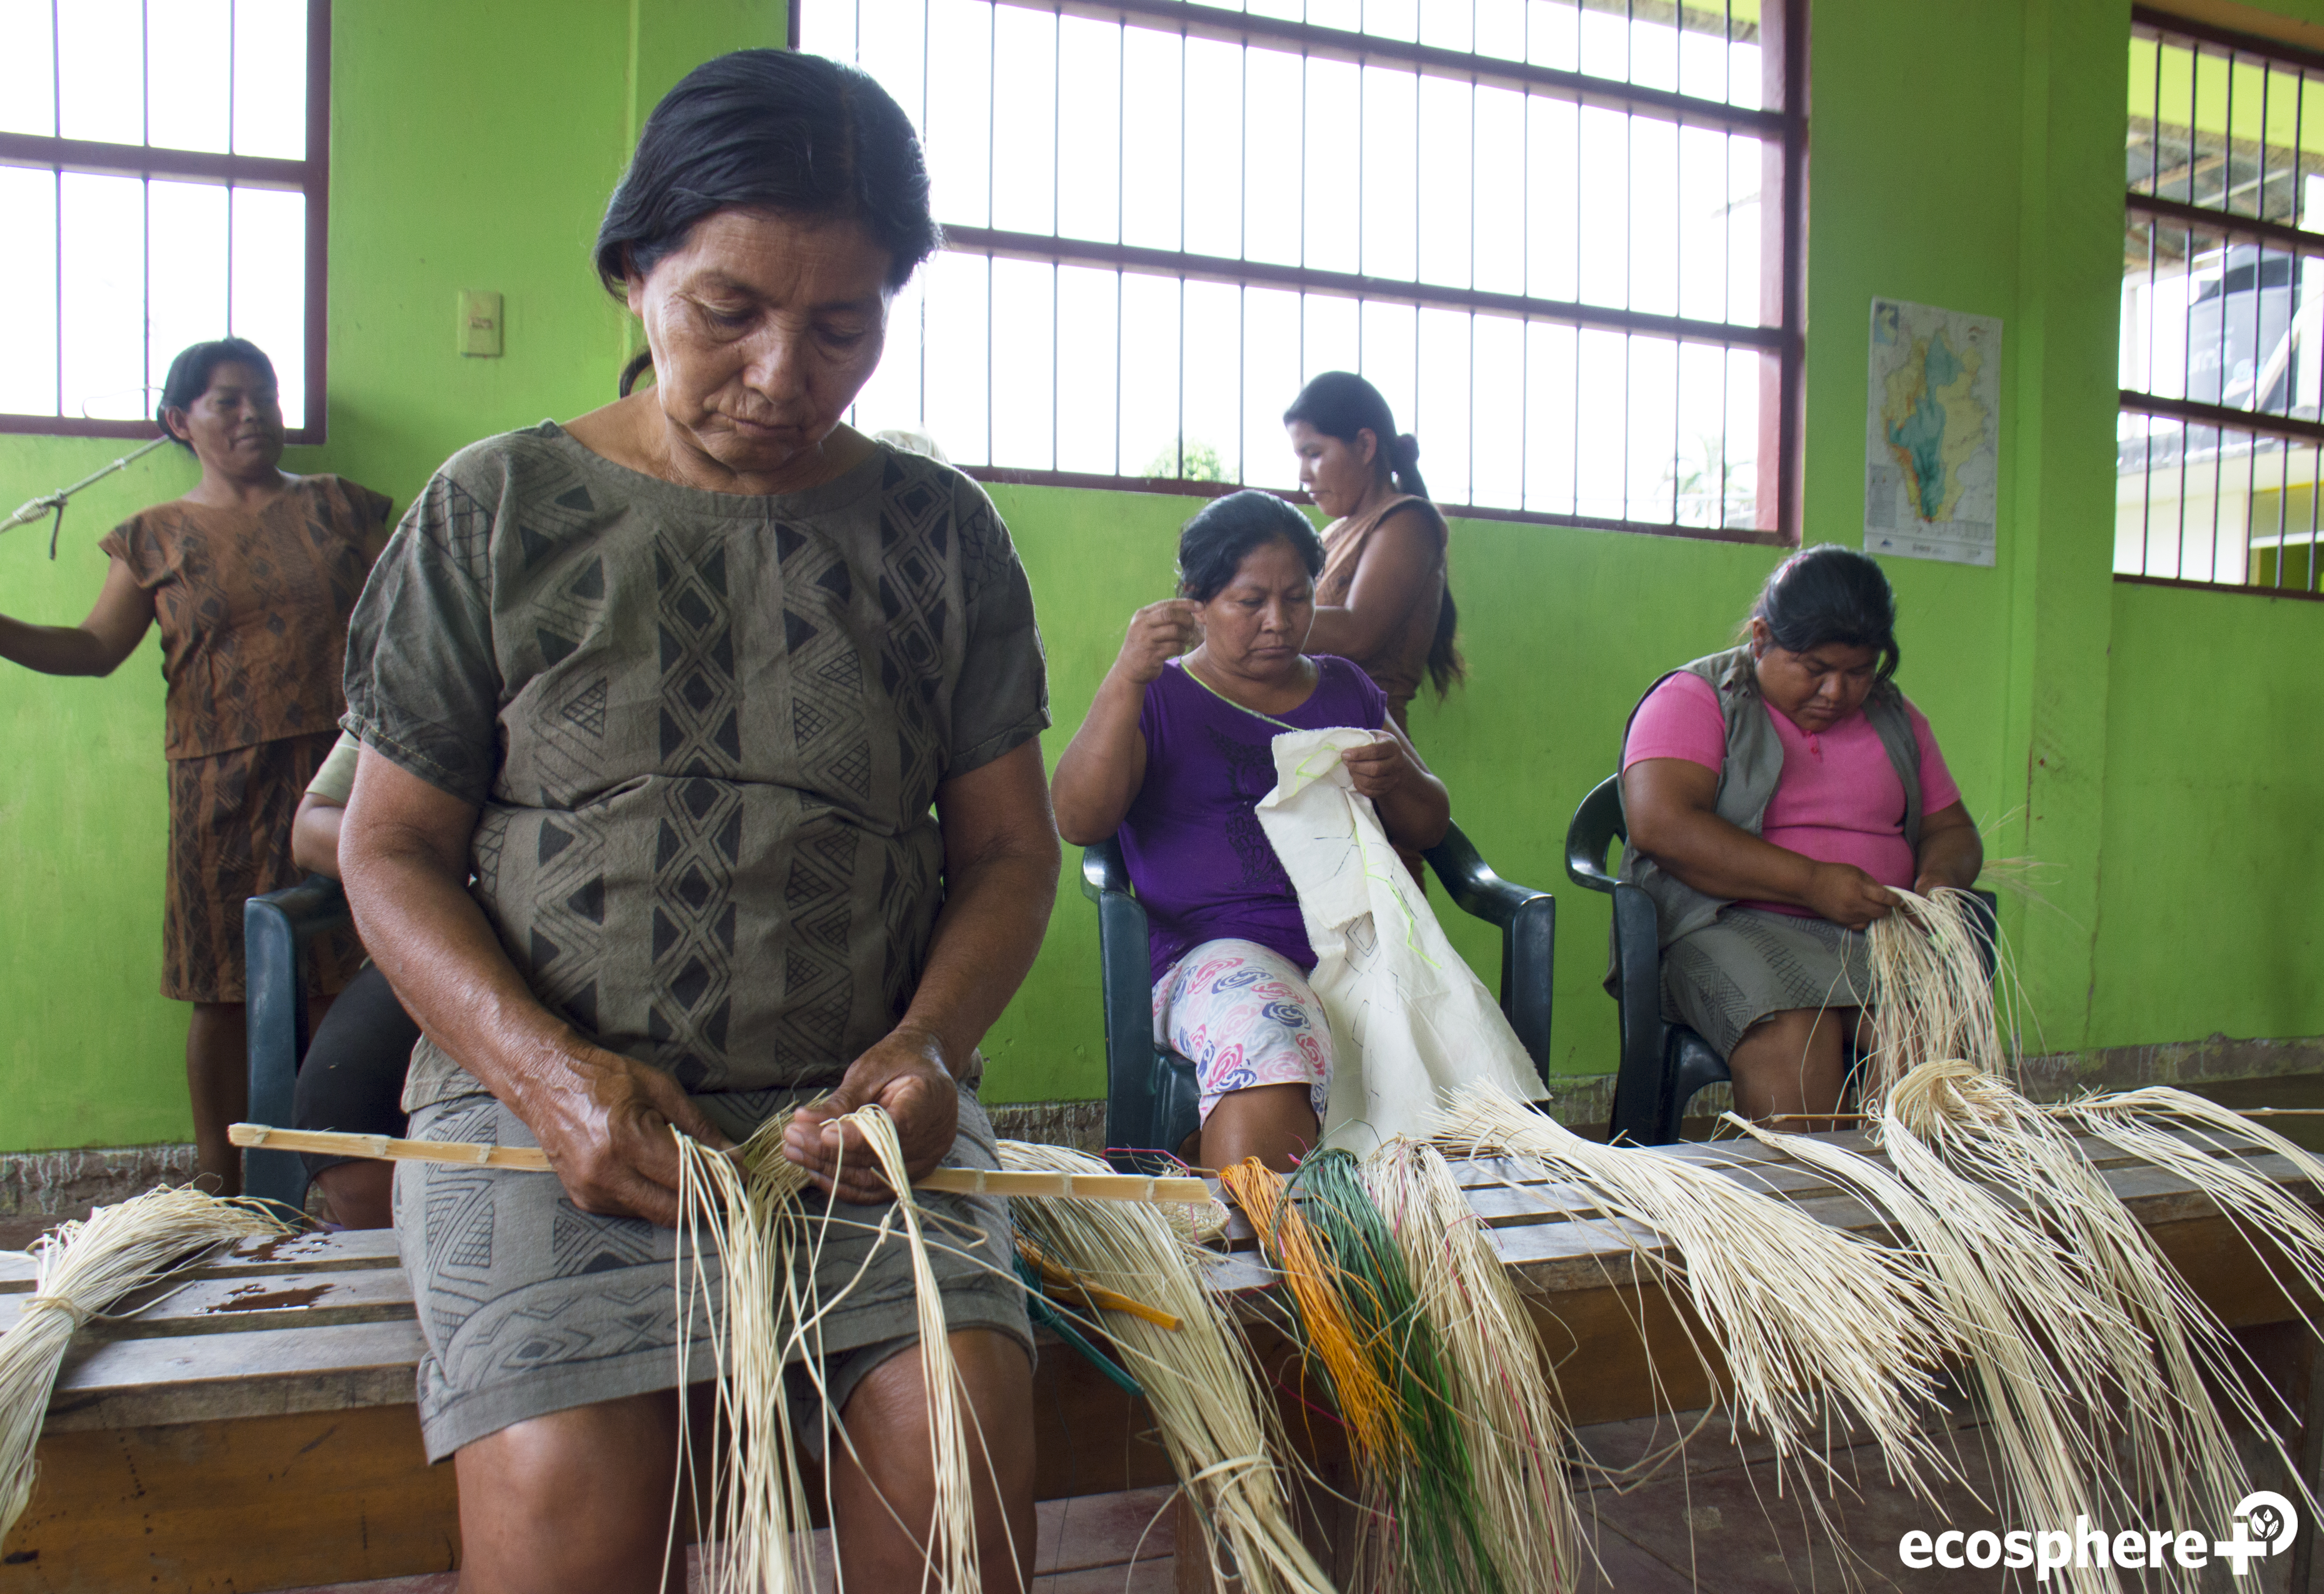 Female-run business driving conservation in the Peruvian Amazon